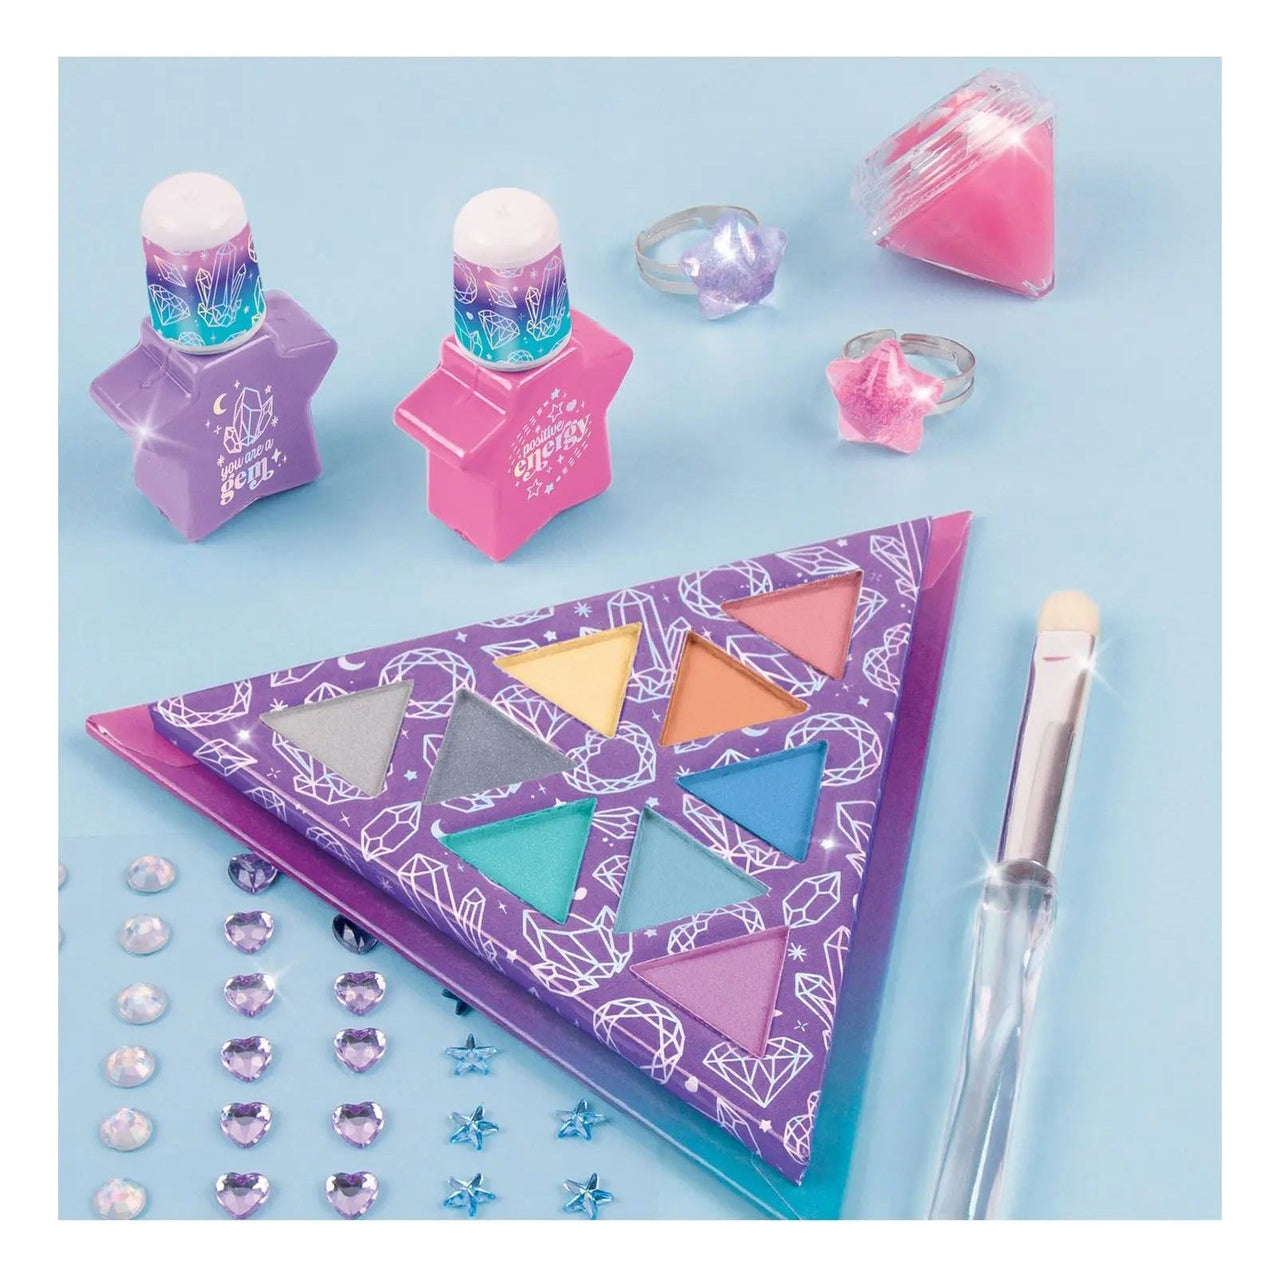 Mystic Crystal Makeup Set with Face Jewels Make It Real